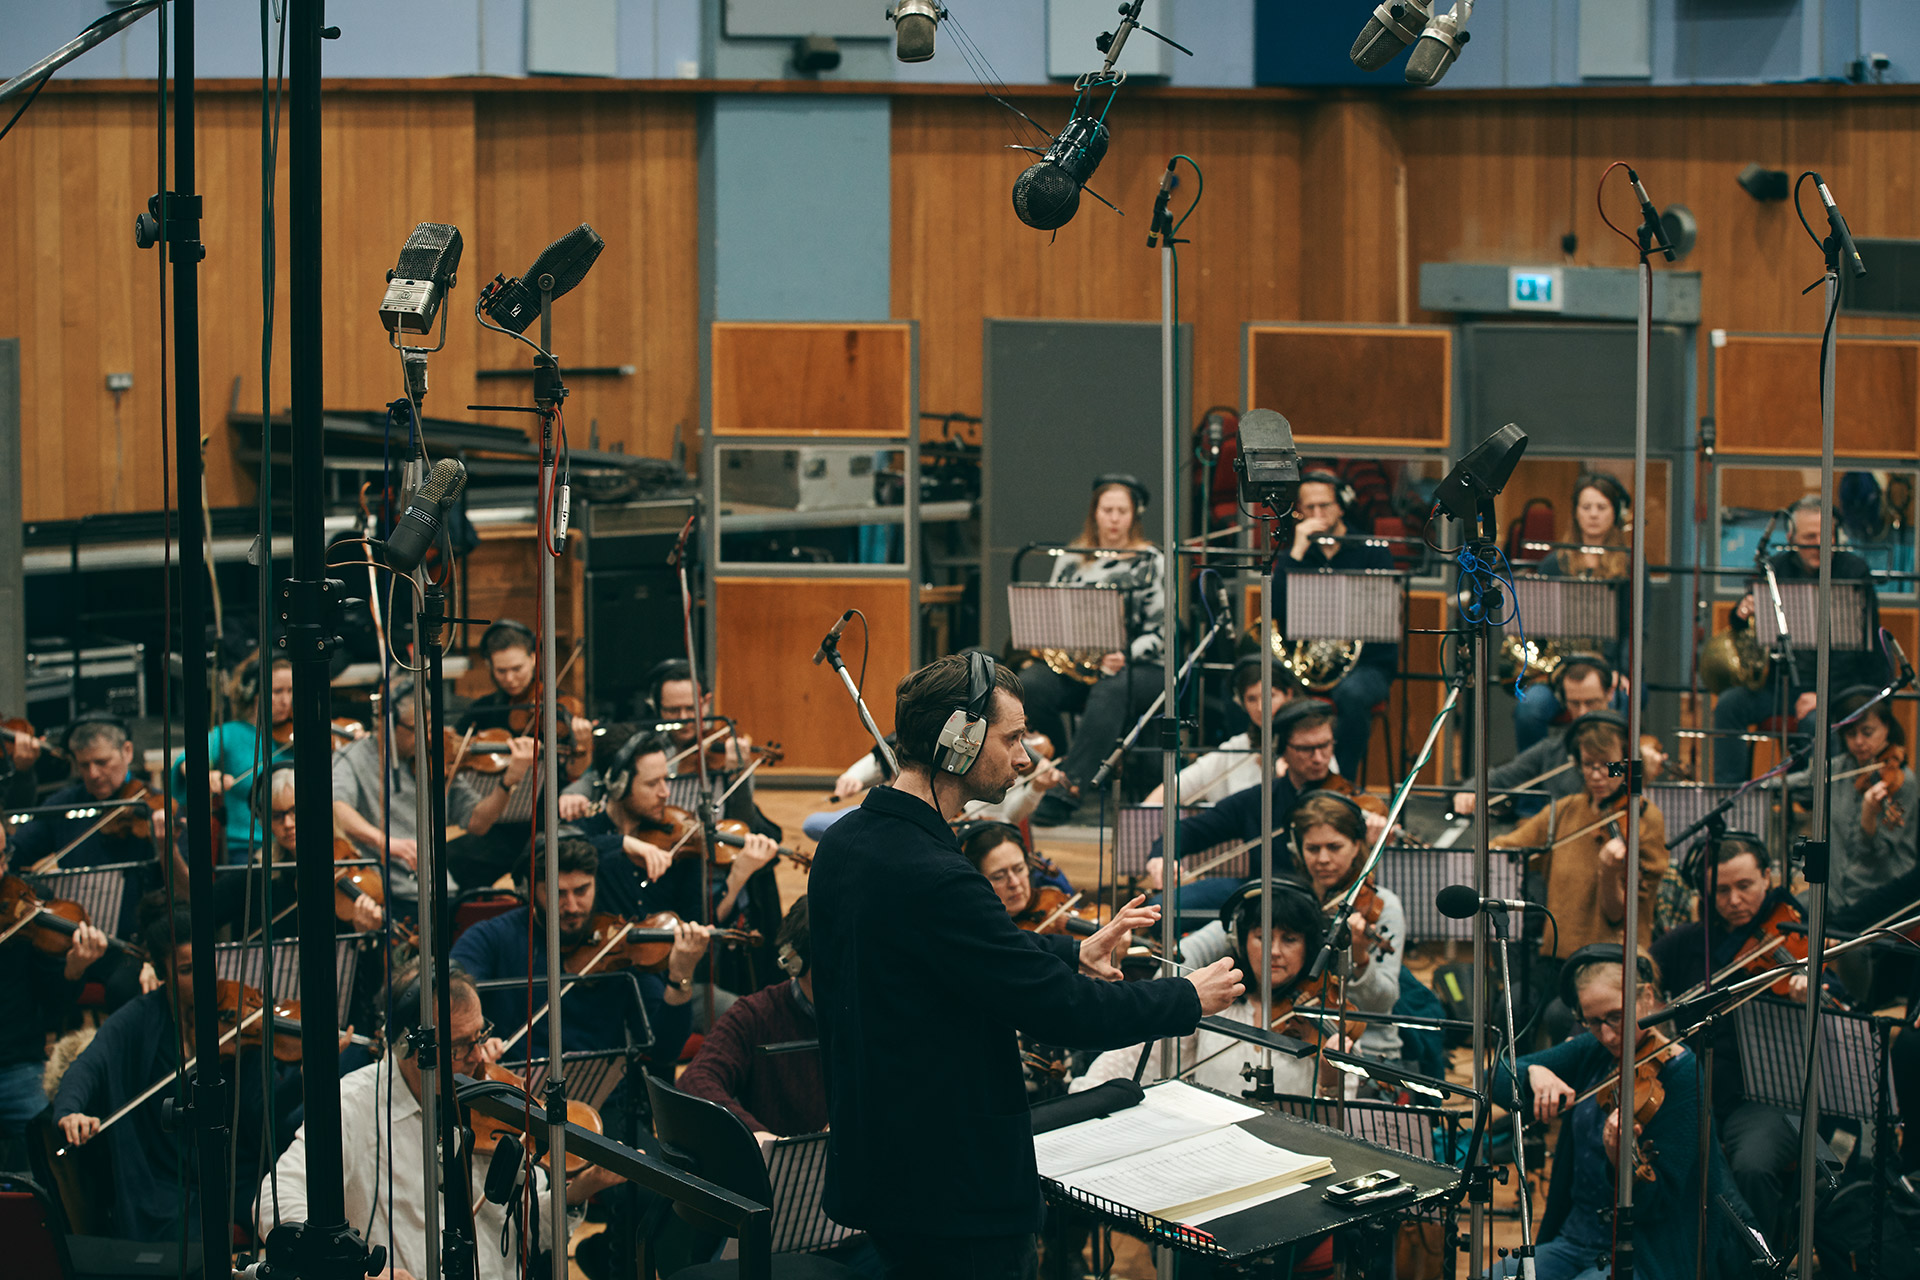 ABBEY ROAD ONE: FILM SCORING SELECTIONS